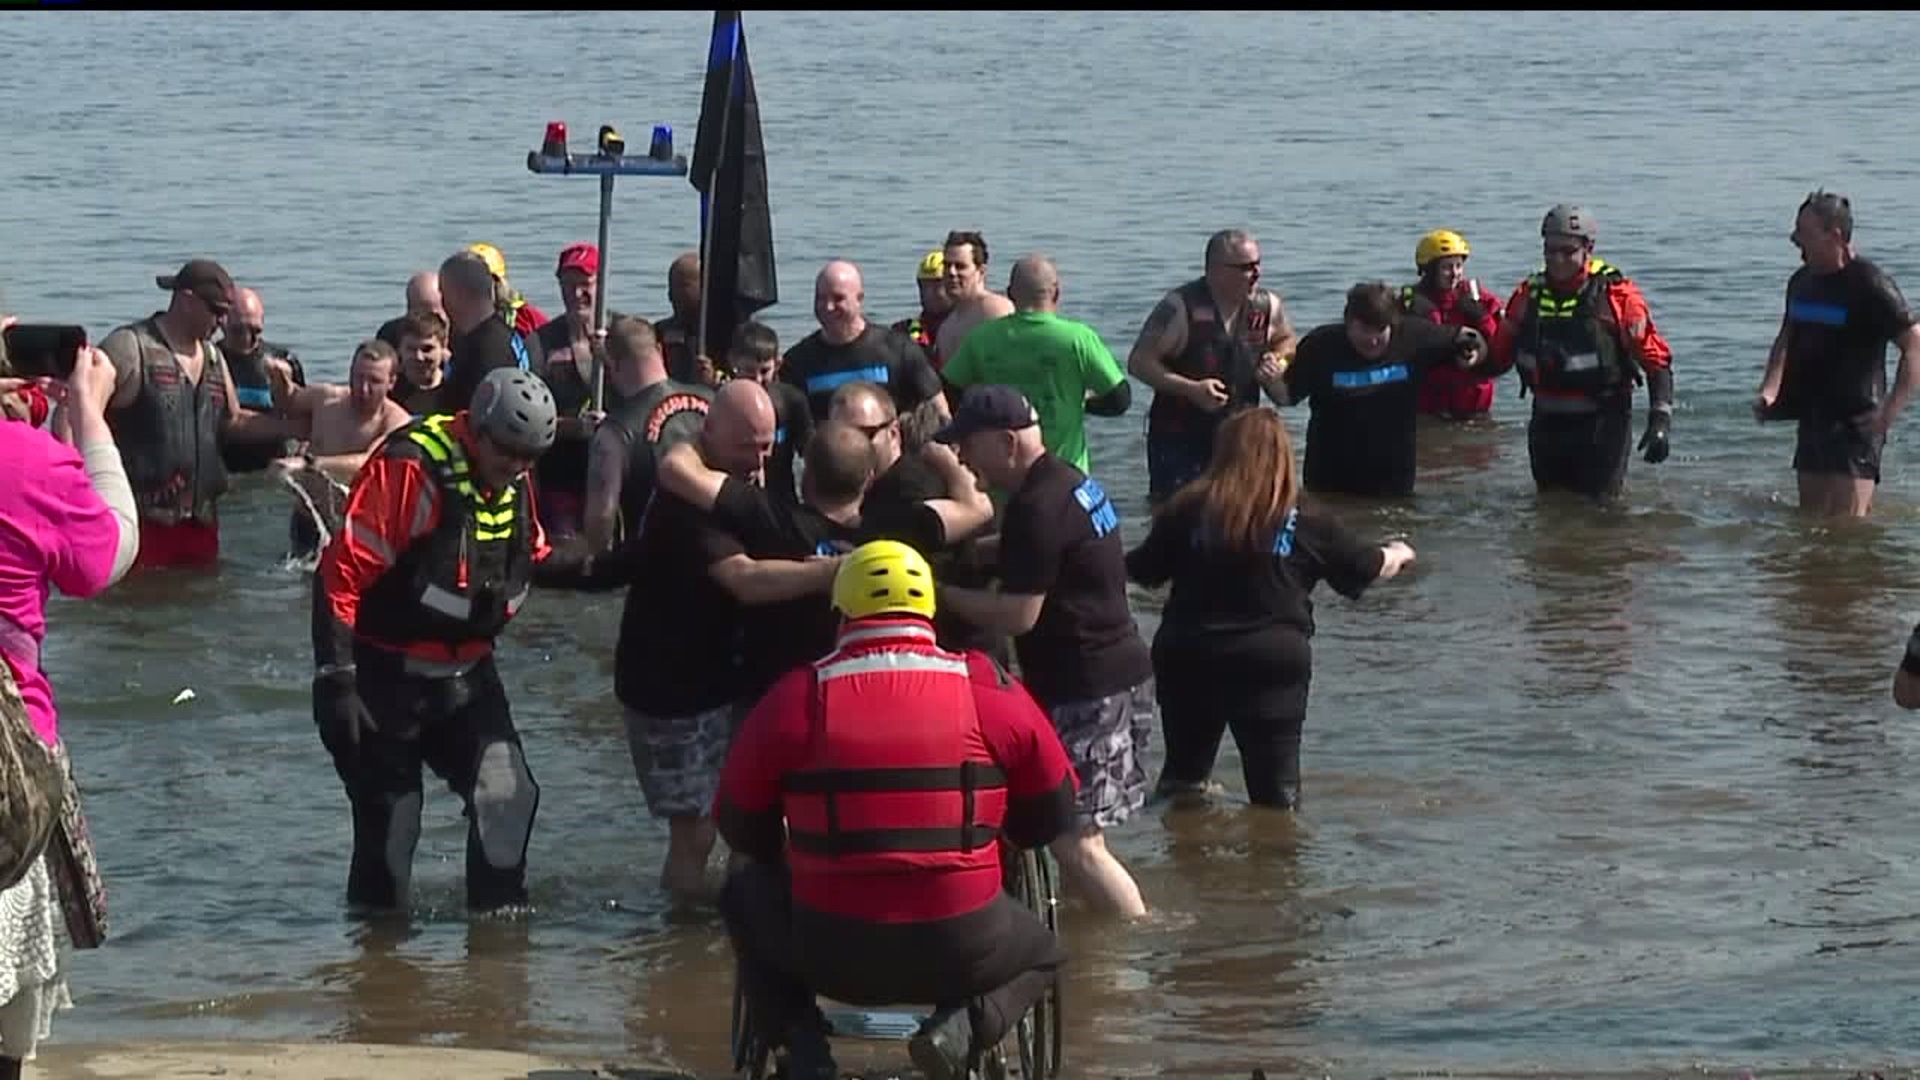 11th Annual Polar Bear Plunge benefiting York County Special Olympics